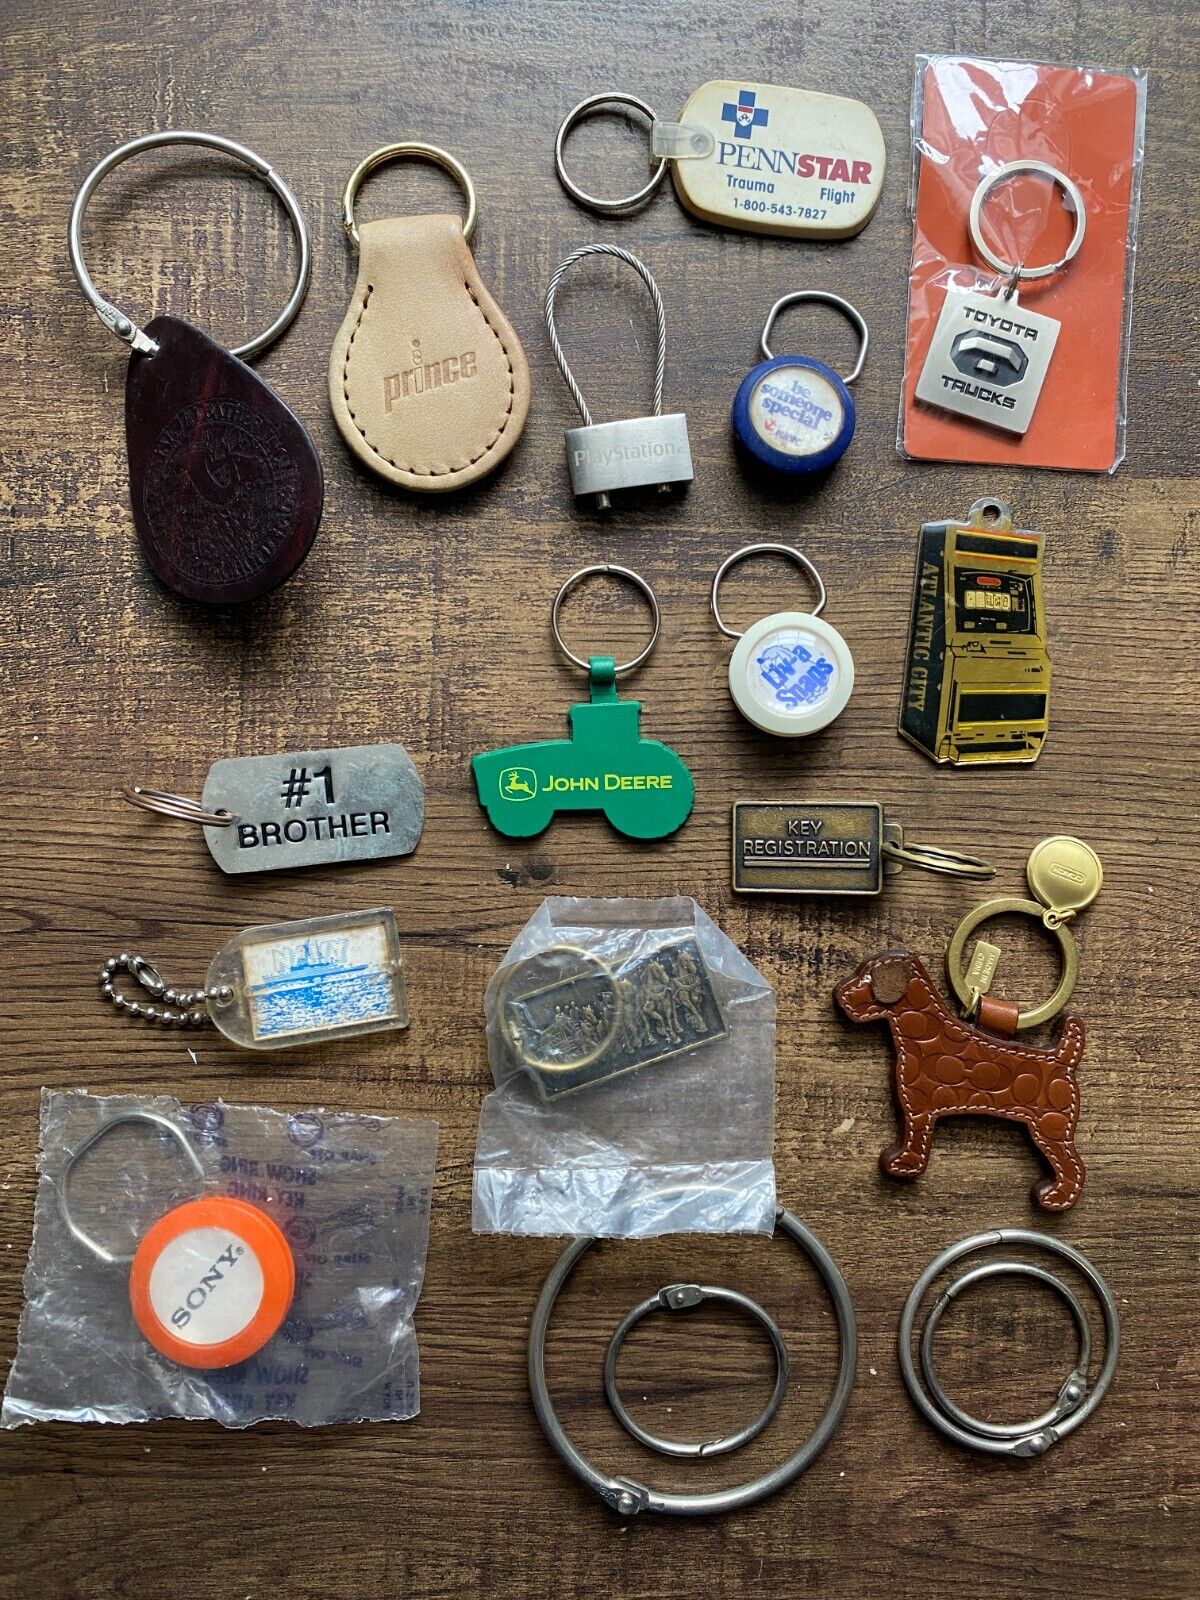 Large Lot oF Vintage Advertising Key Chains & Rings - Auto - John Deere - Sony